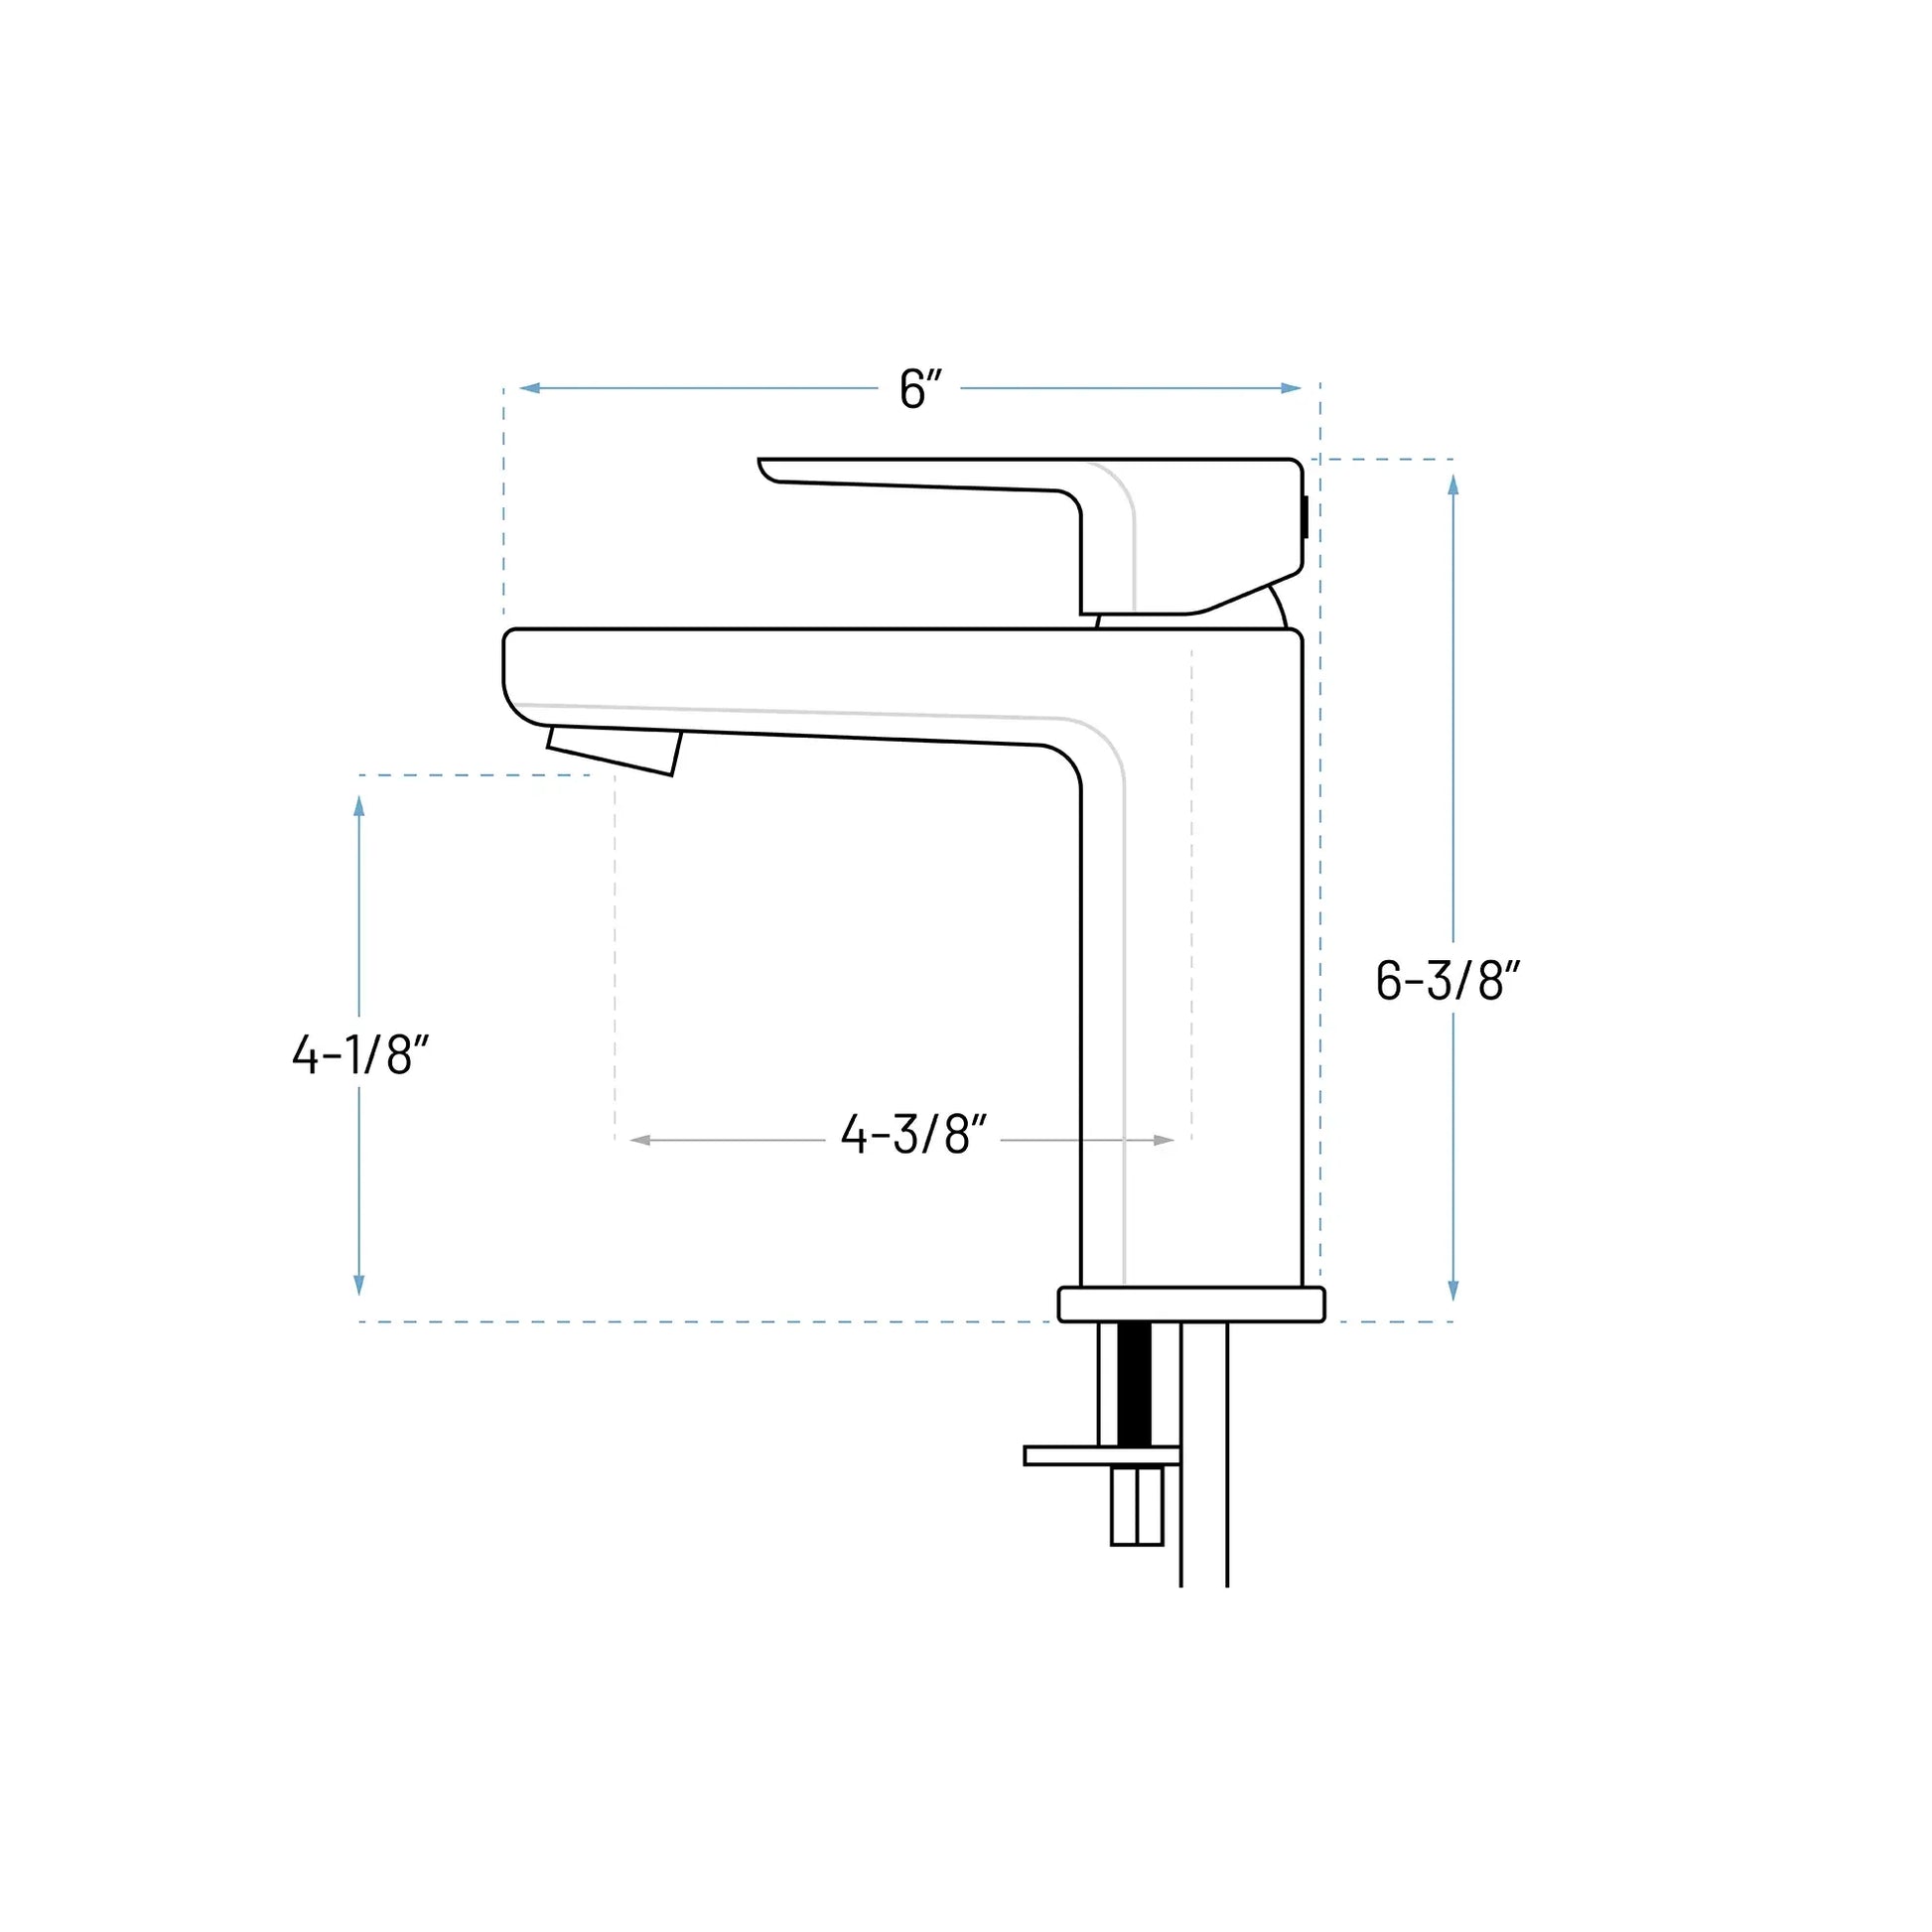 Technical Drawing of a single handle bathroom faucet